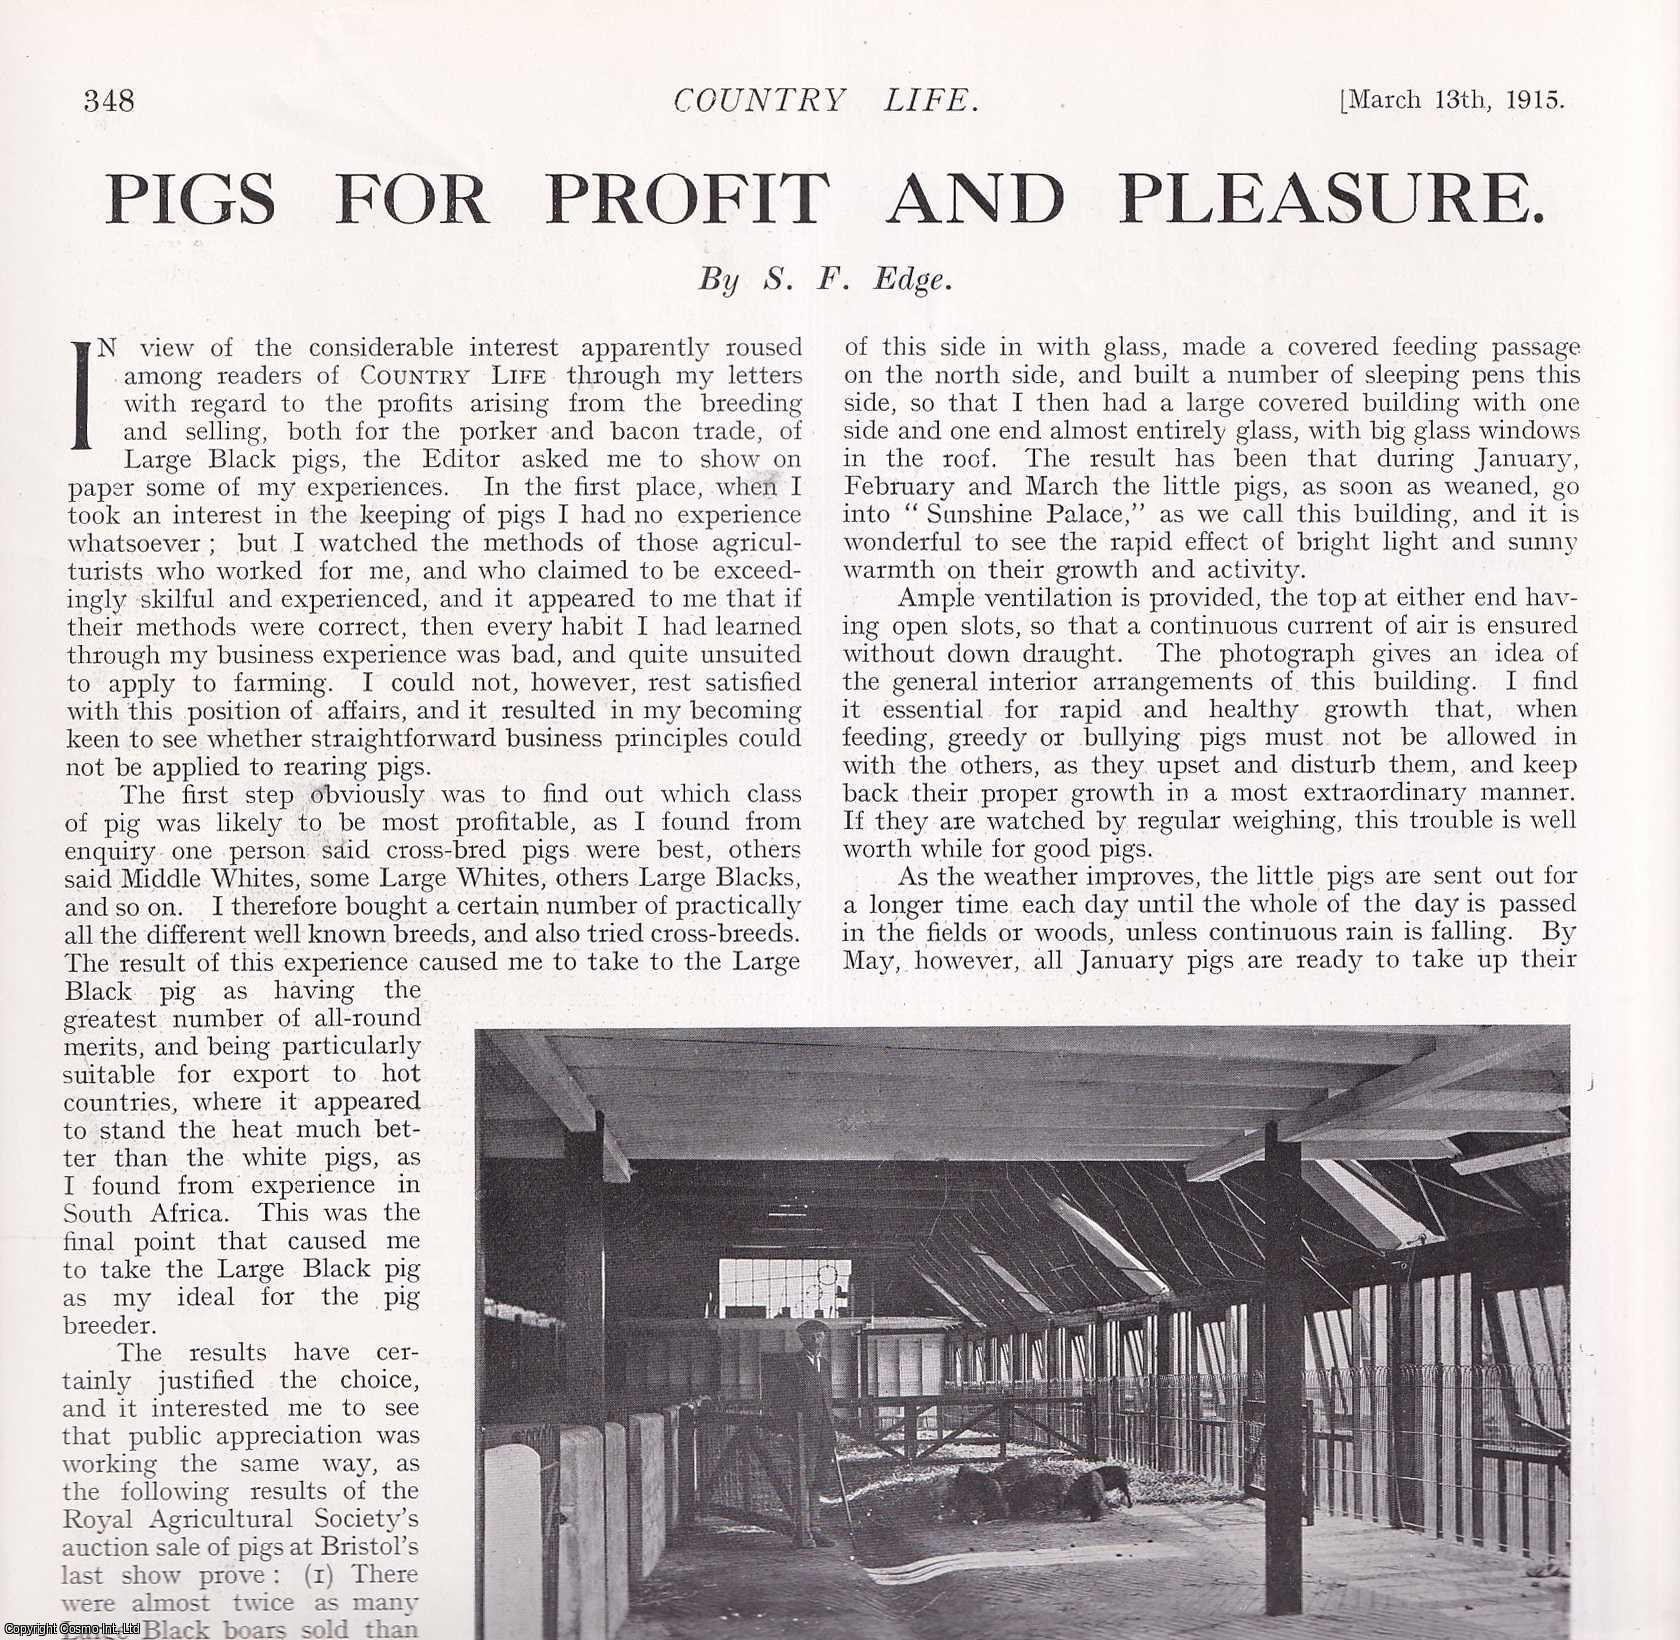 COUNTRY LIFE - Breeding Pigs for Profit and Pleasure. Several pictures and accompanying text, removed from an original issue of Country Life Magazine, 1915.